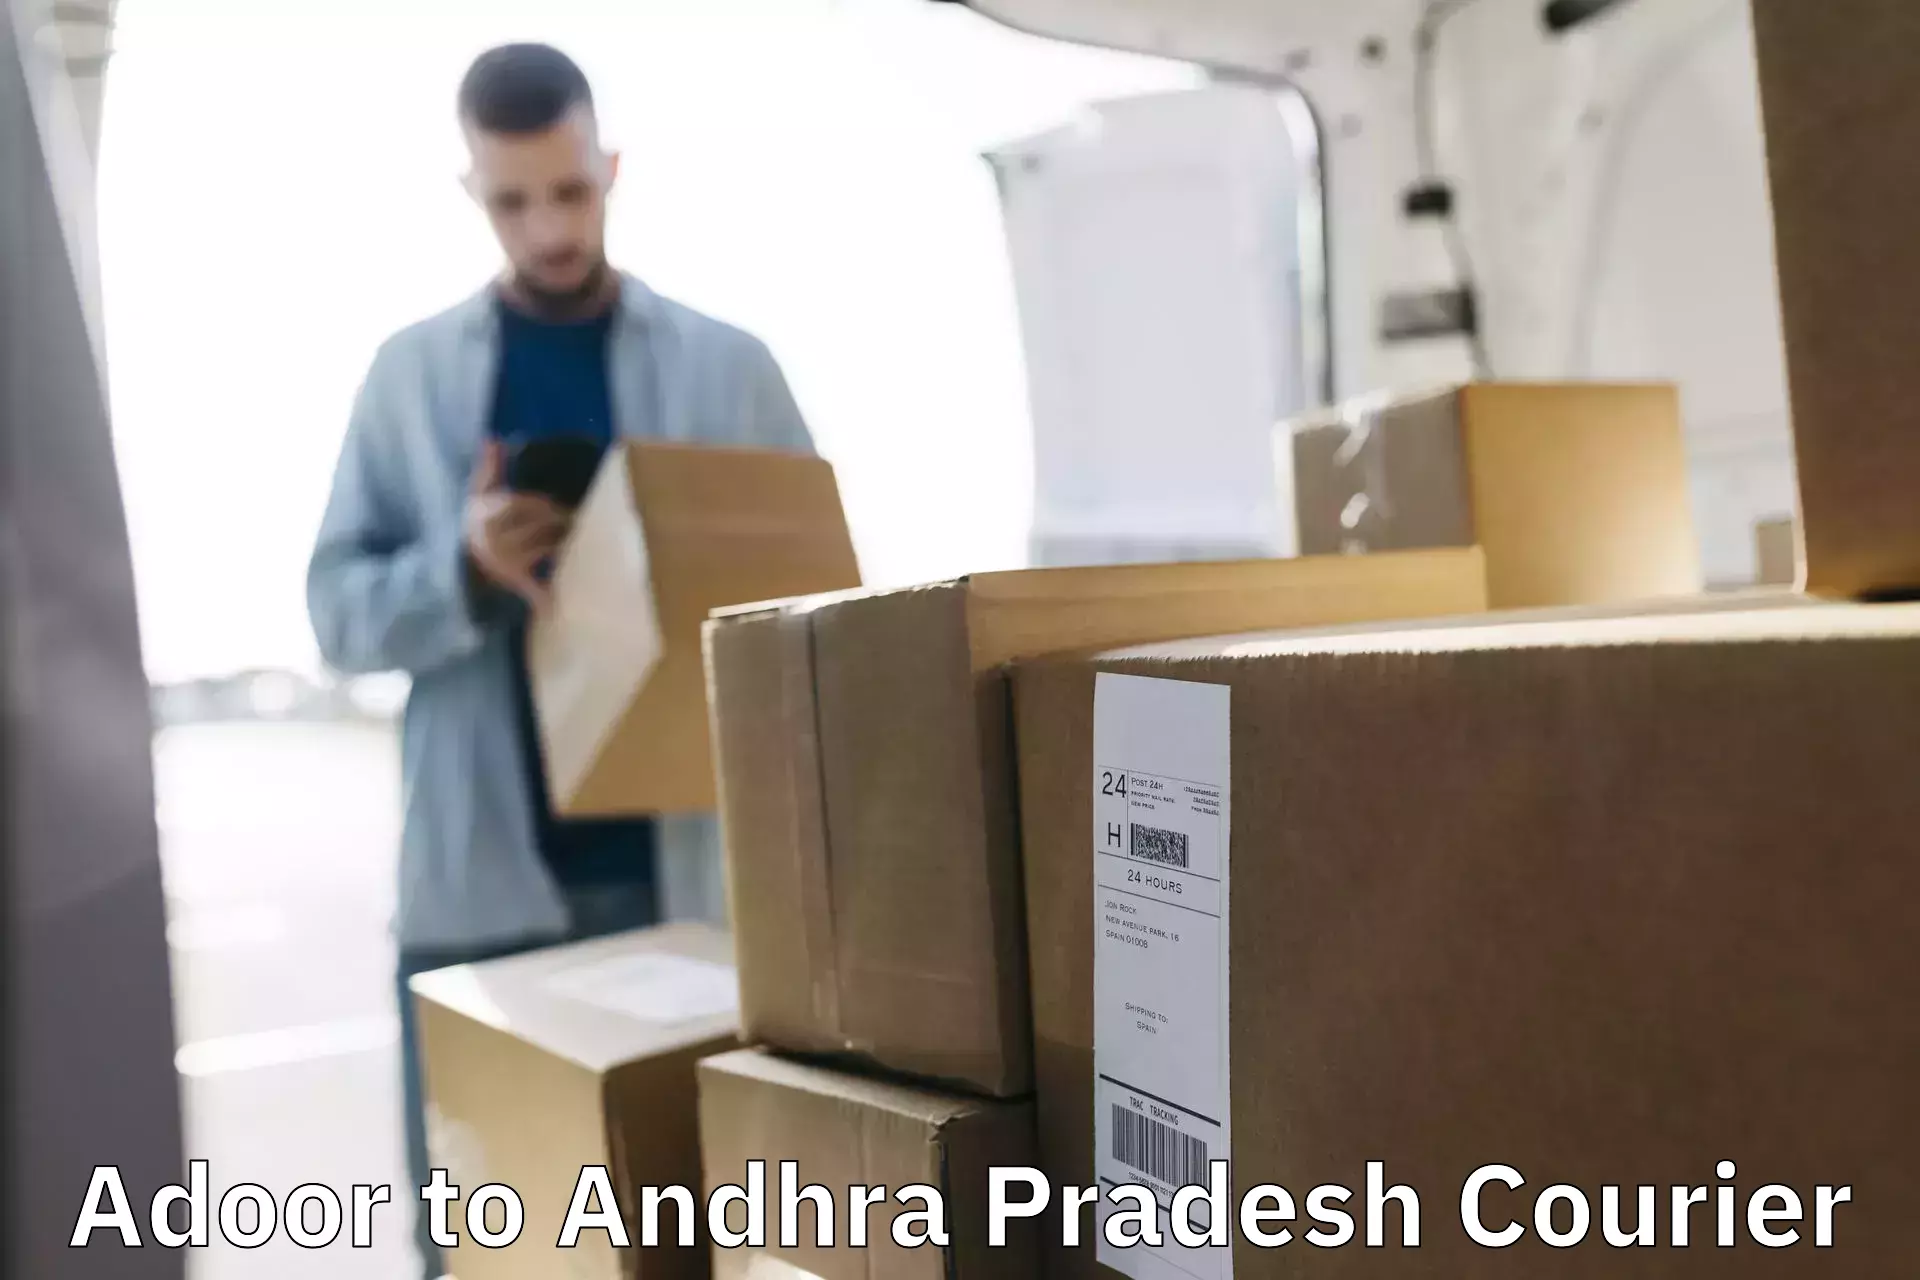 Multi-national courier services Adoor to Yerragondapalem